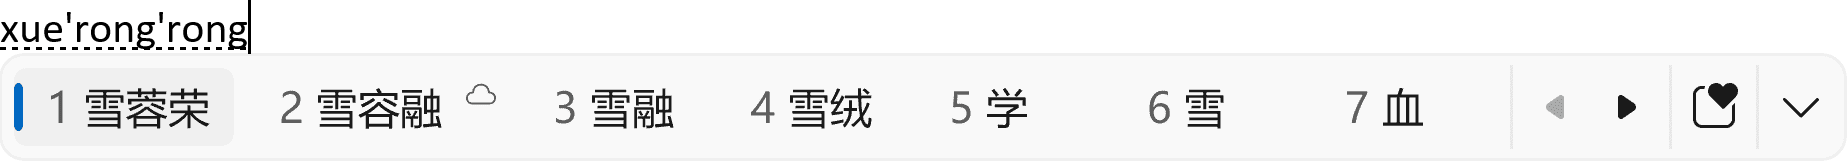 Simplified Chinese IME candidate window with a word suggestion from Bing at the second place.